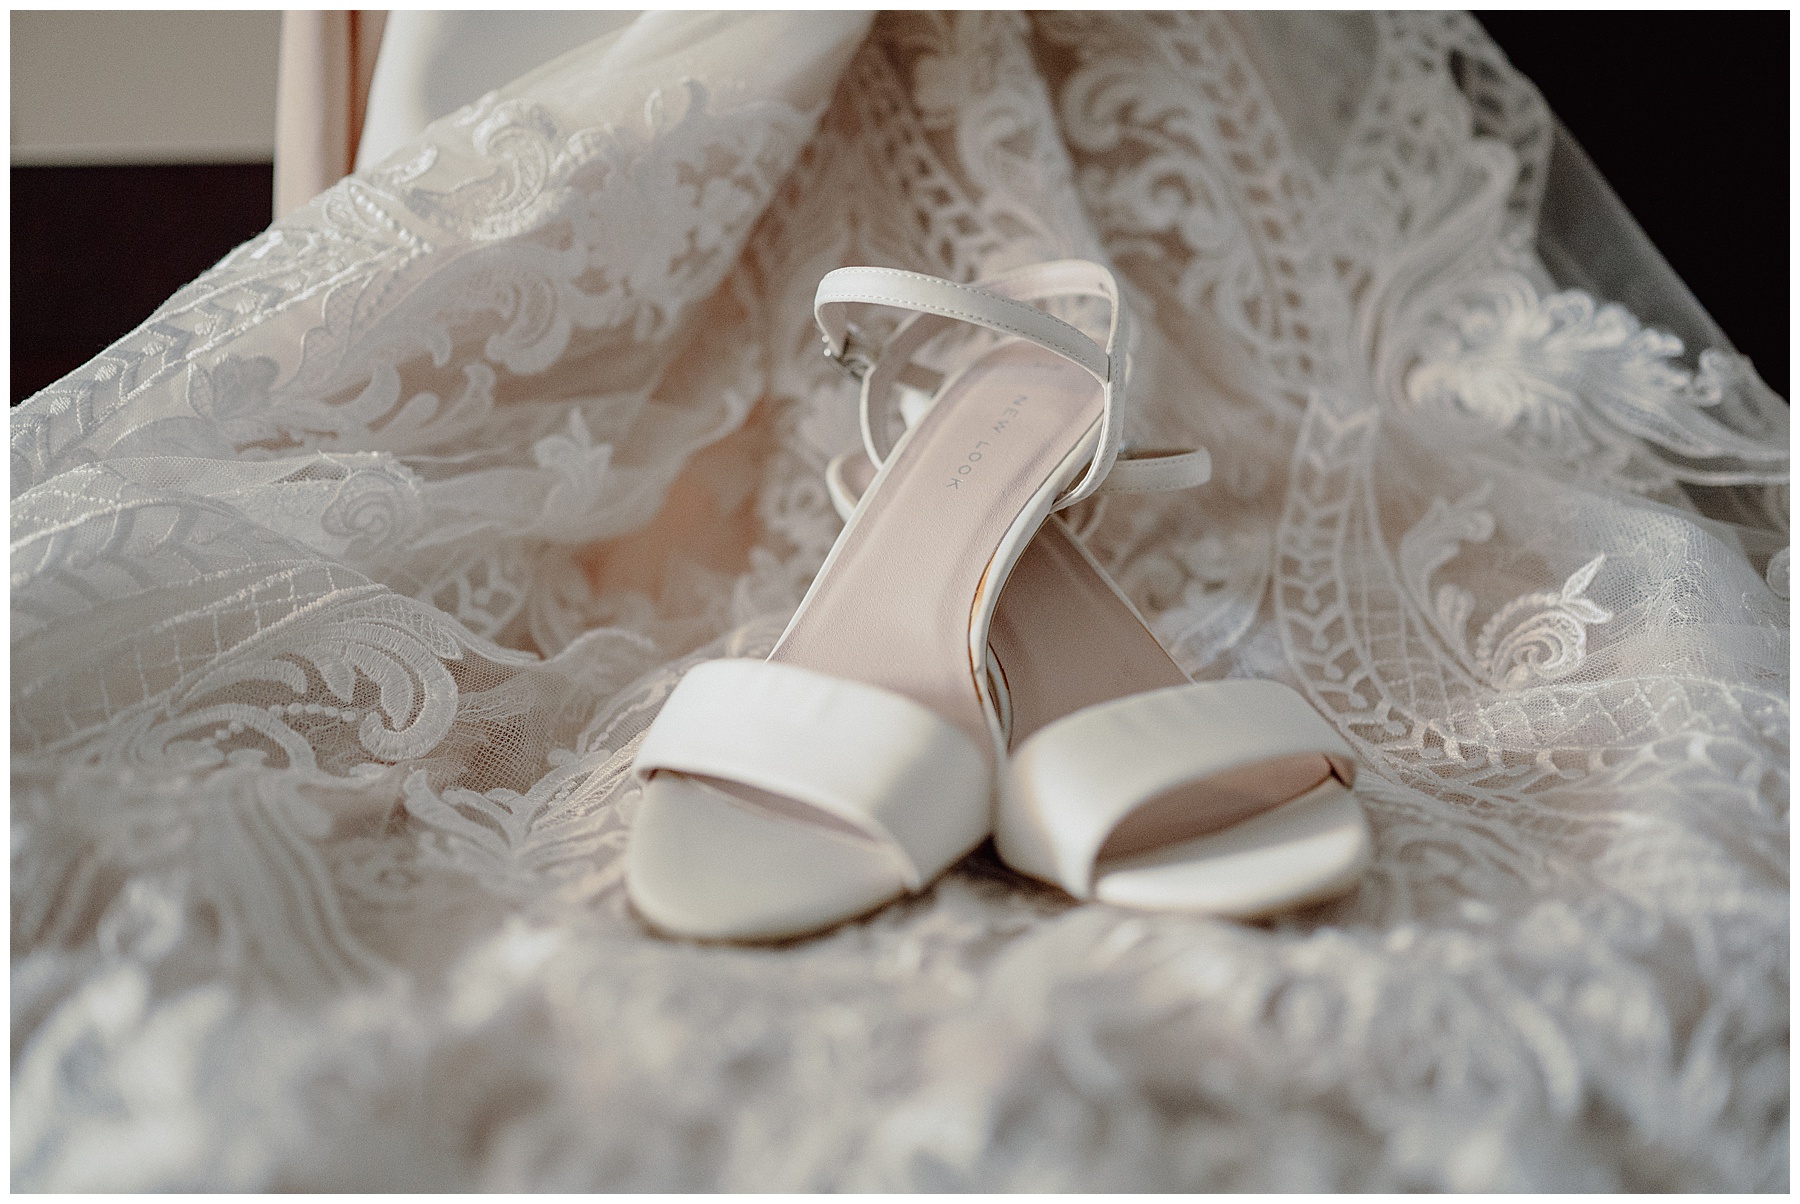 Wedding shoes and dress